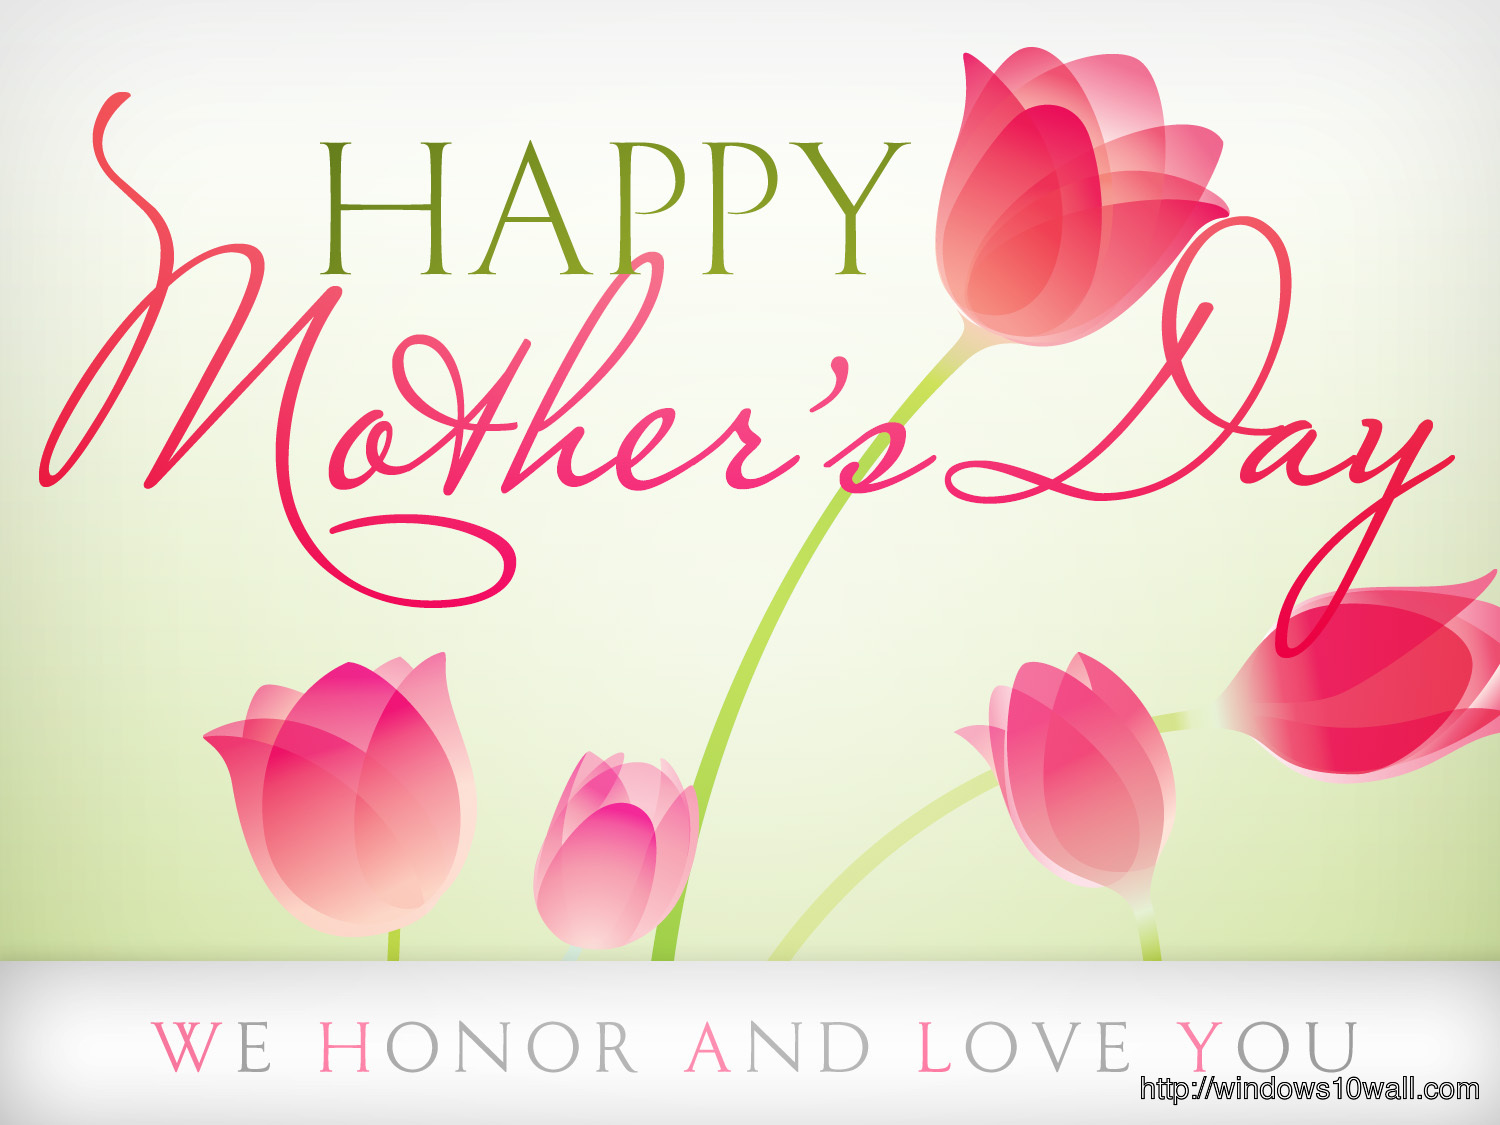 Happy Mothers Day Wishes Greetings Celebration Love Wallpaper